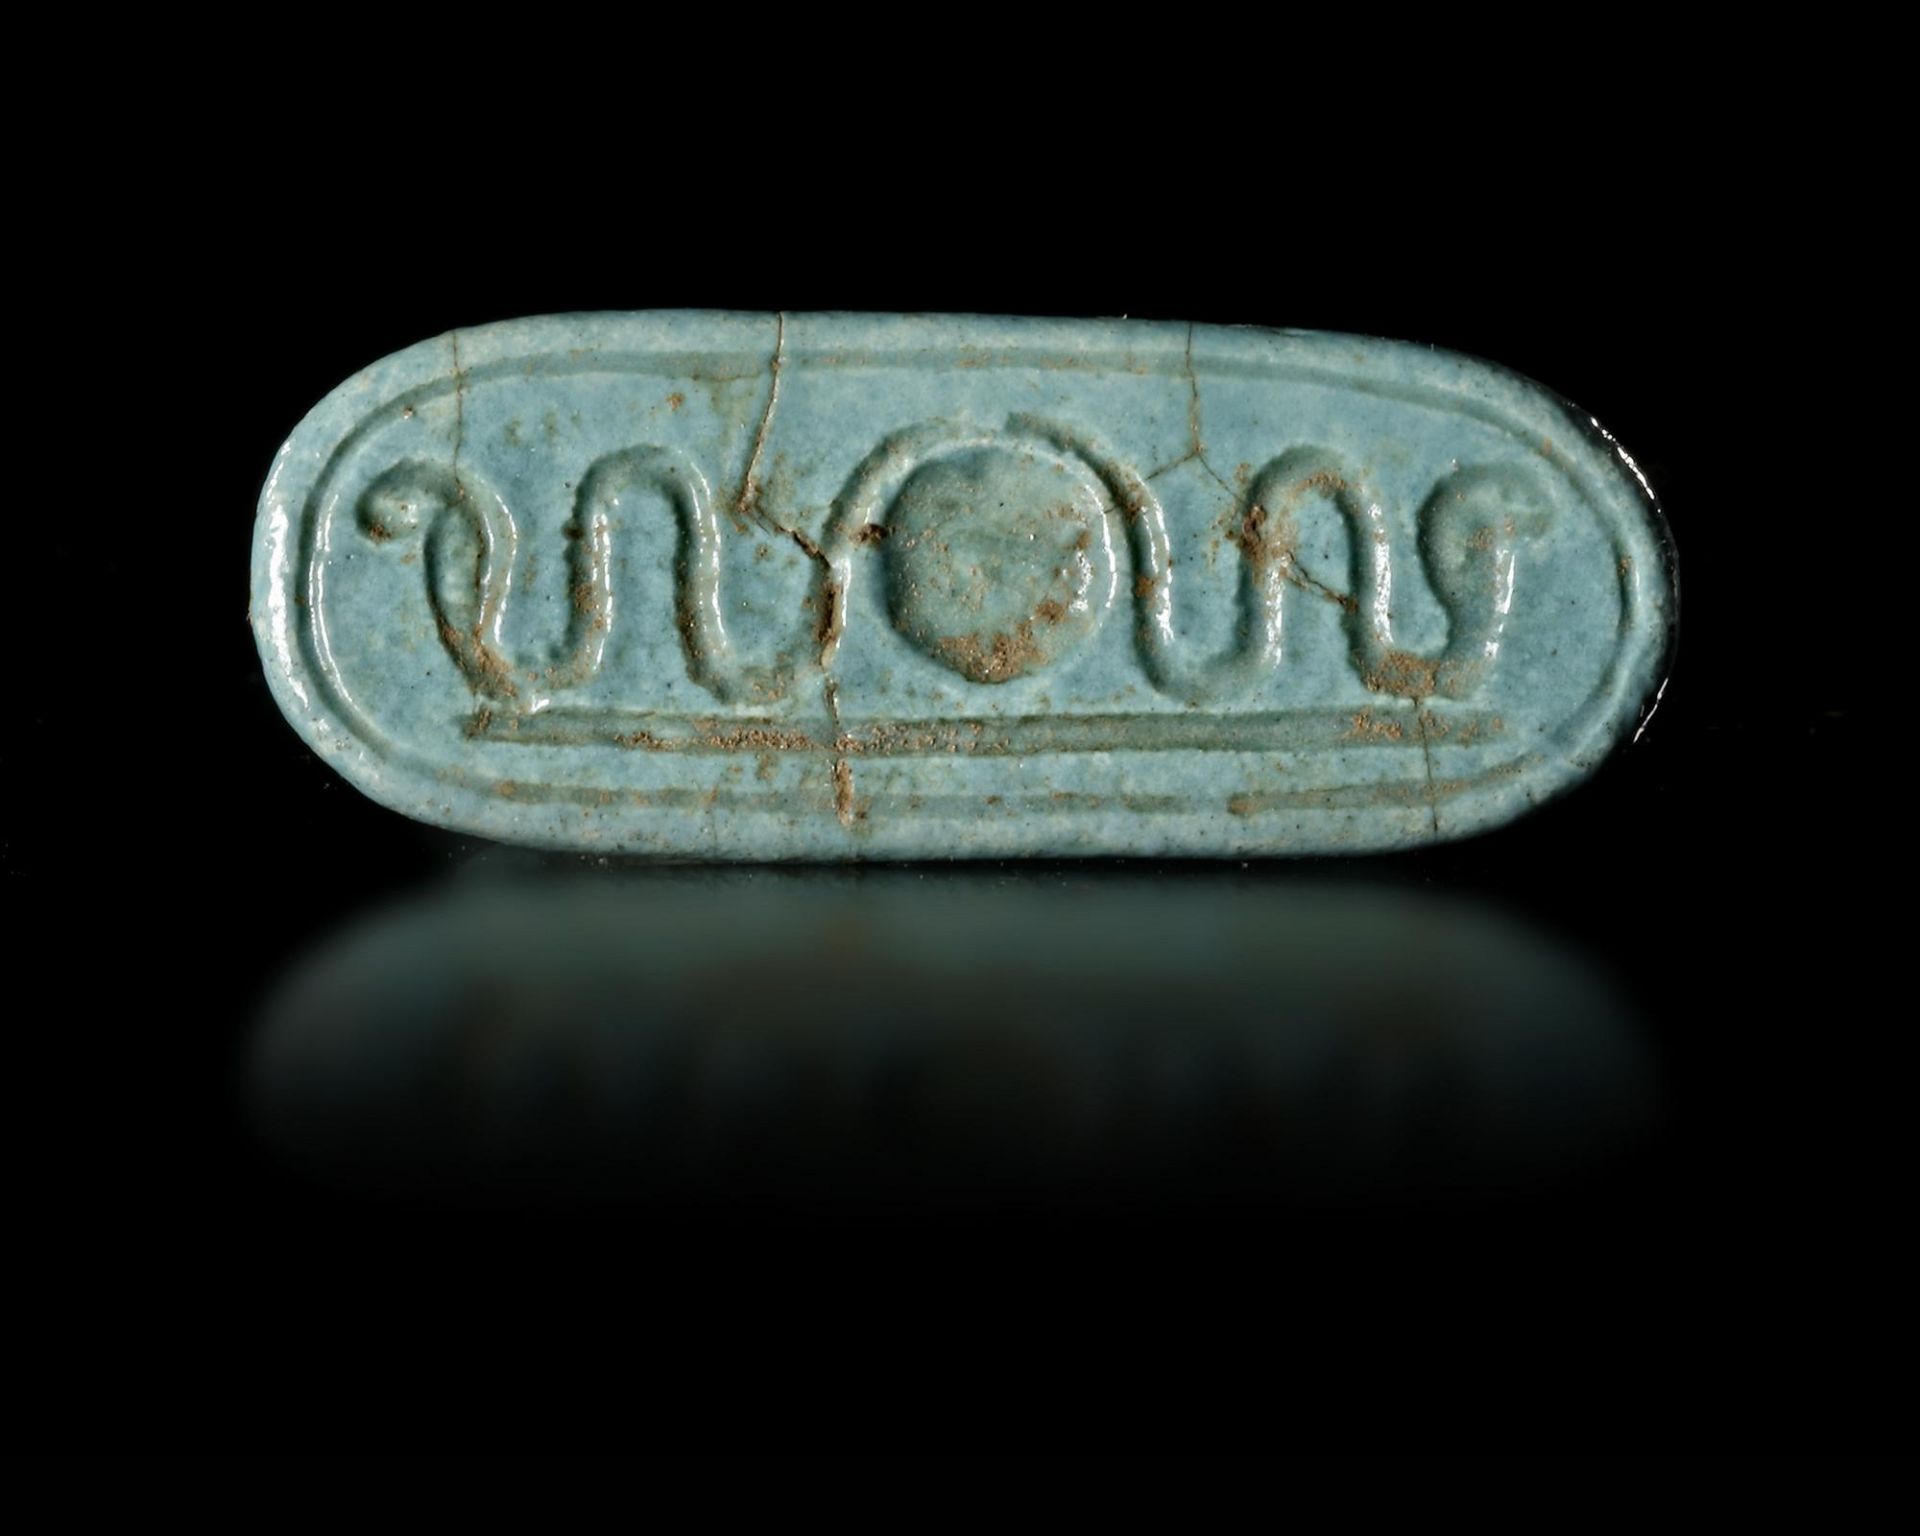 AN EGYPTIAN FAIENCE AMULET/ STAMP SEALS, CIRCA 4TH CENTURY B.C. - Image 3 of 4